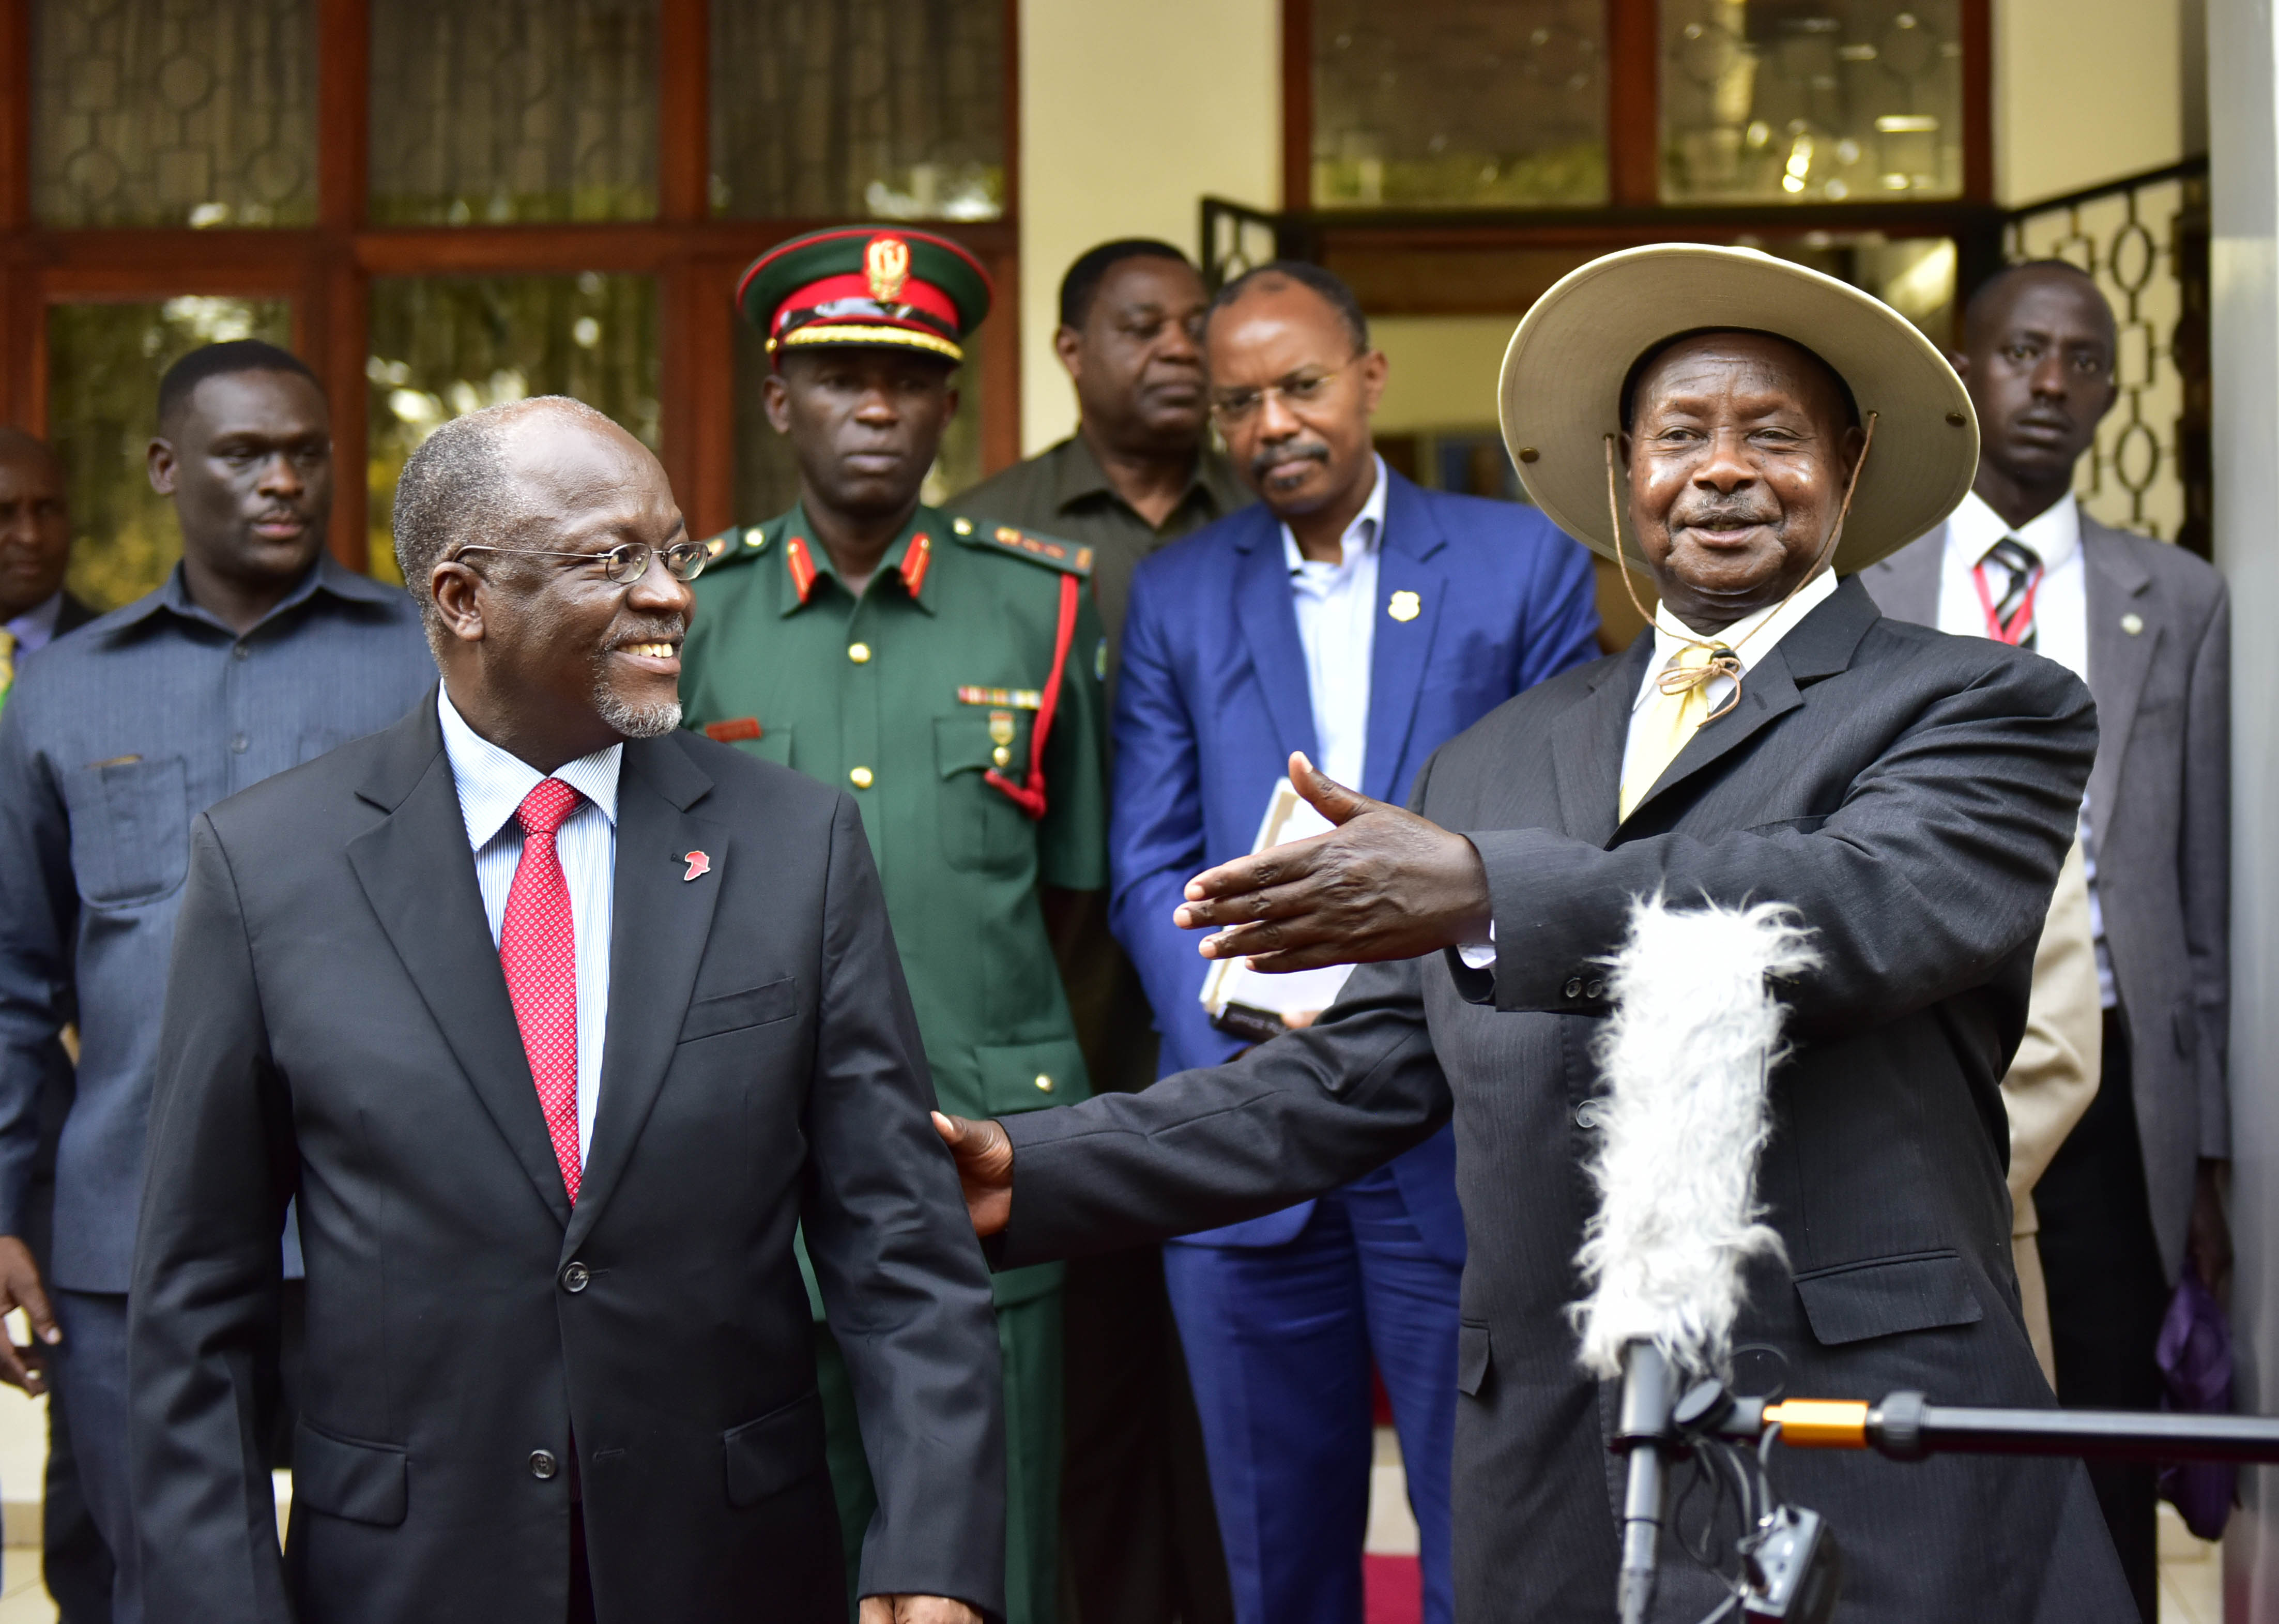 The President Yoweri Kaguta Museveni interacts with Tanzanian President John Pombe Magufuli shortly after the bilateral meeting at the Arusha state lodge in Tanzania on Tuesday 30th February 2016. President Museveni together with the East African Heads of State are meeting in Arusha for the 17th Ordinary Summit.